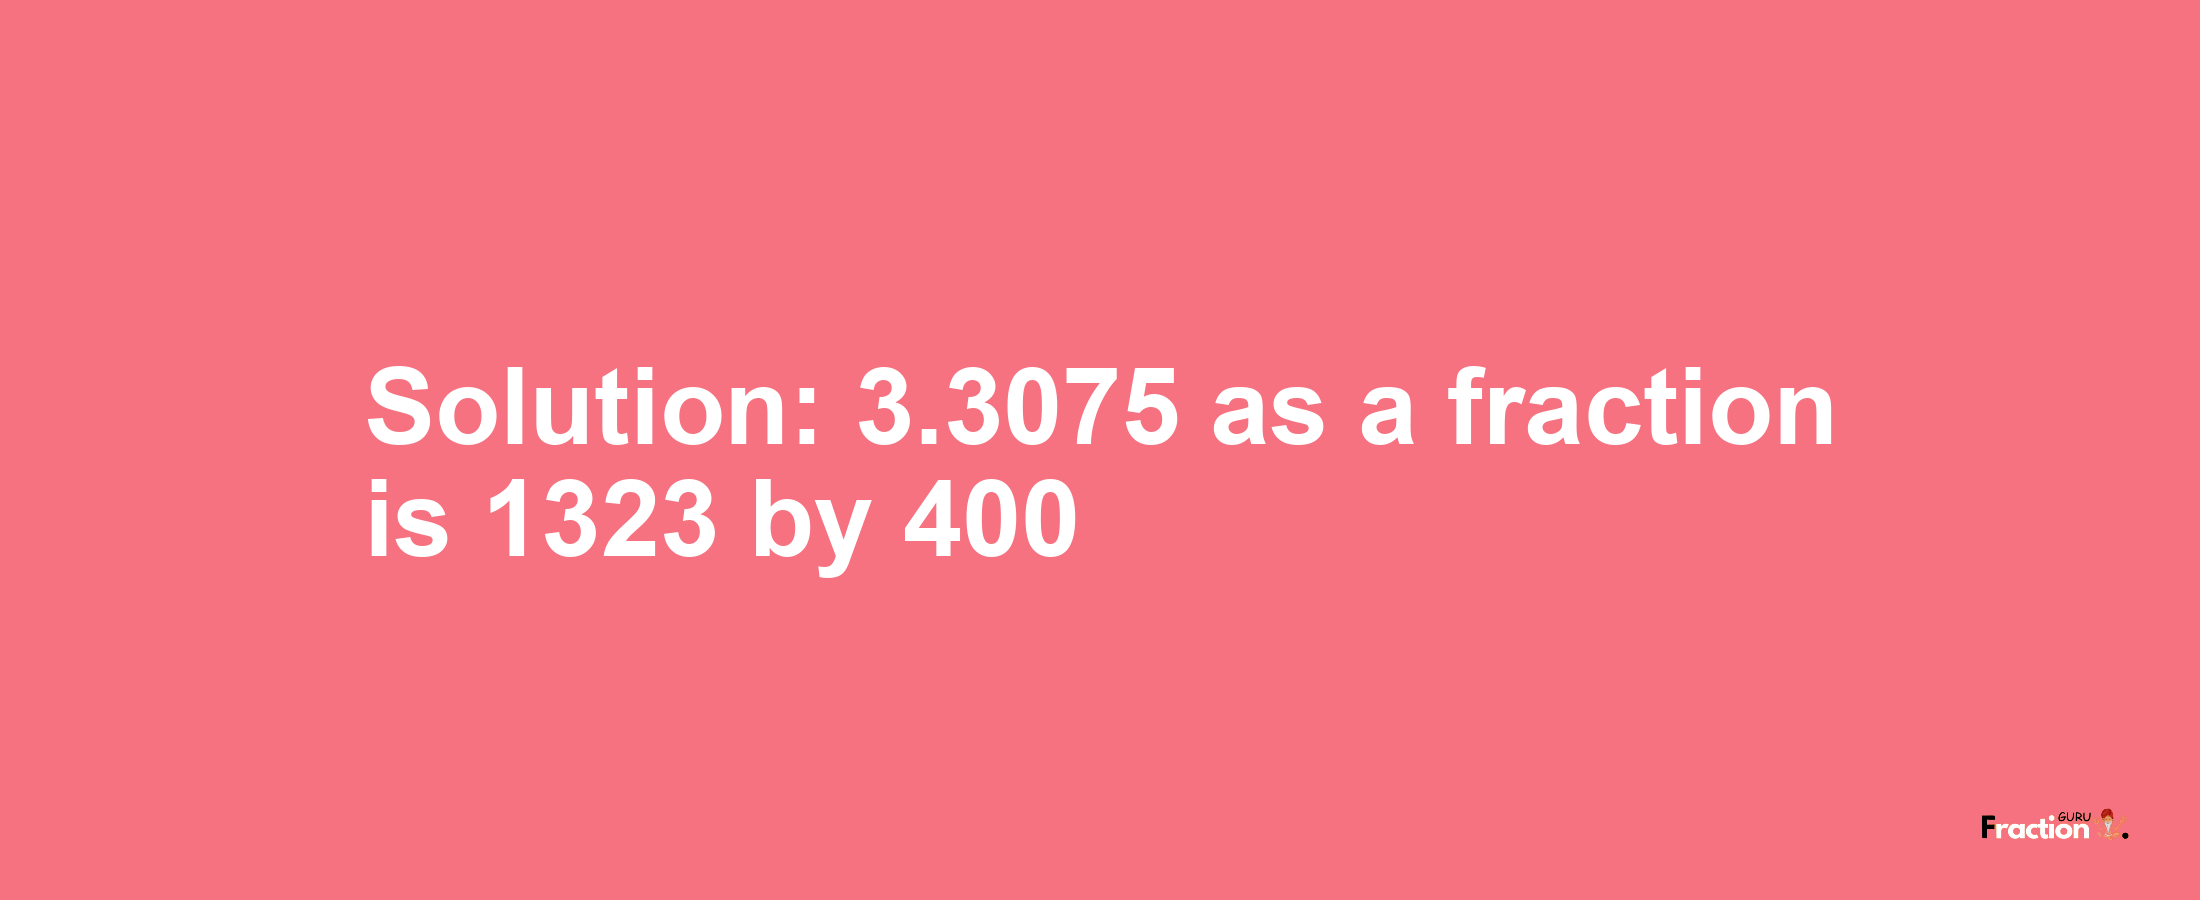 Solution:3.3075 as a fraction is 1323/400